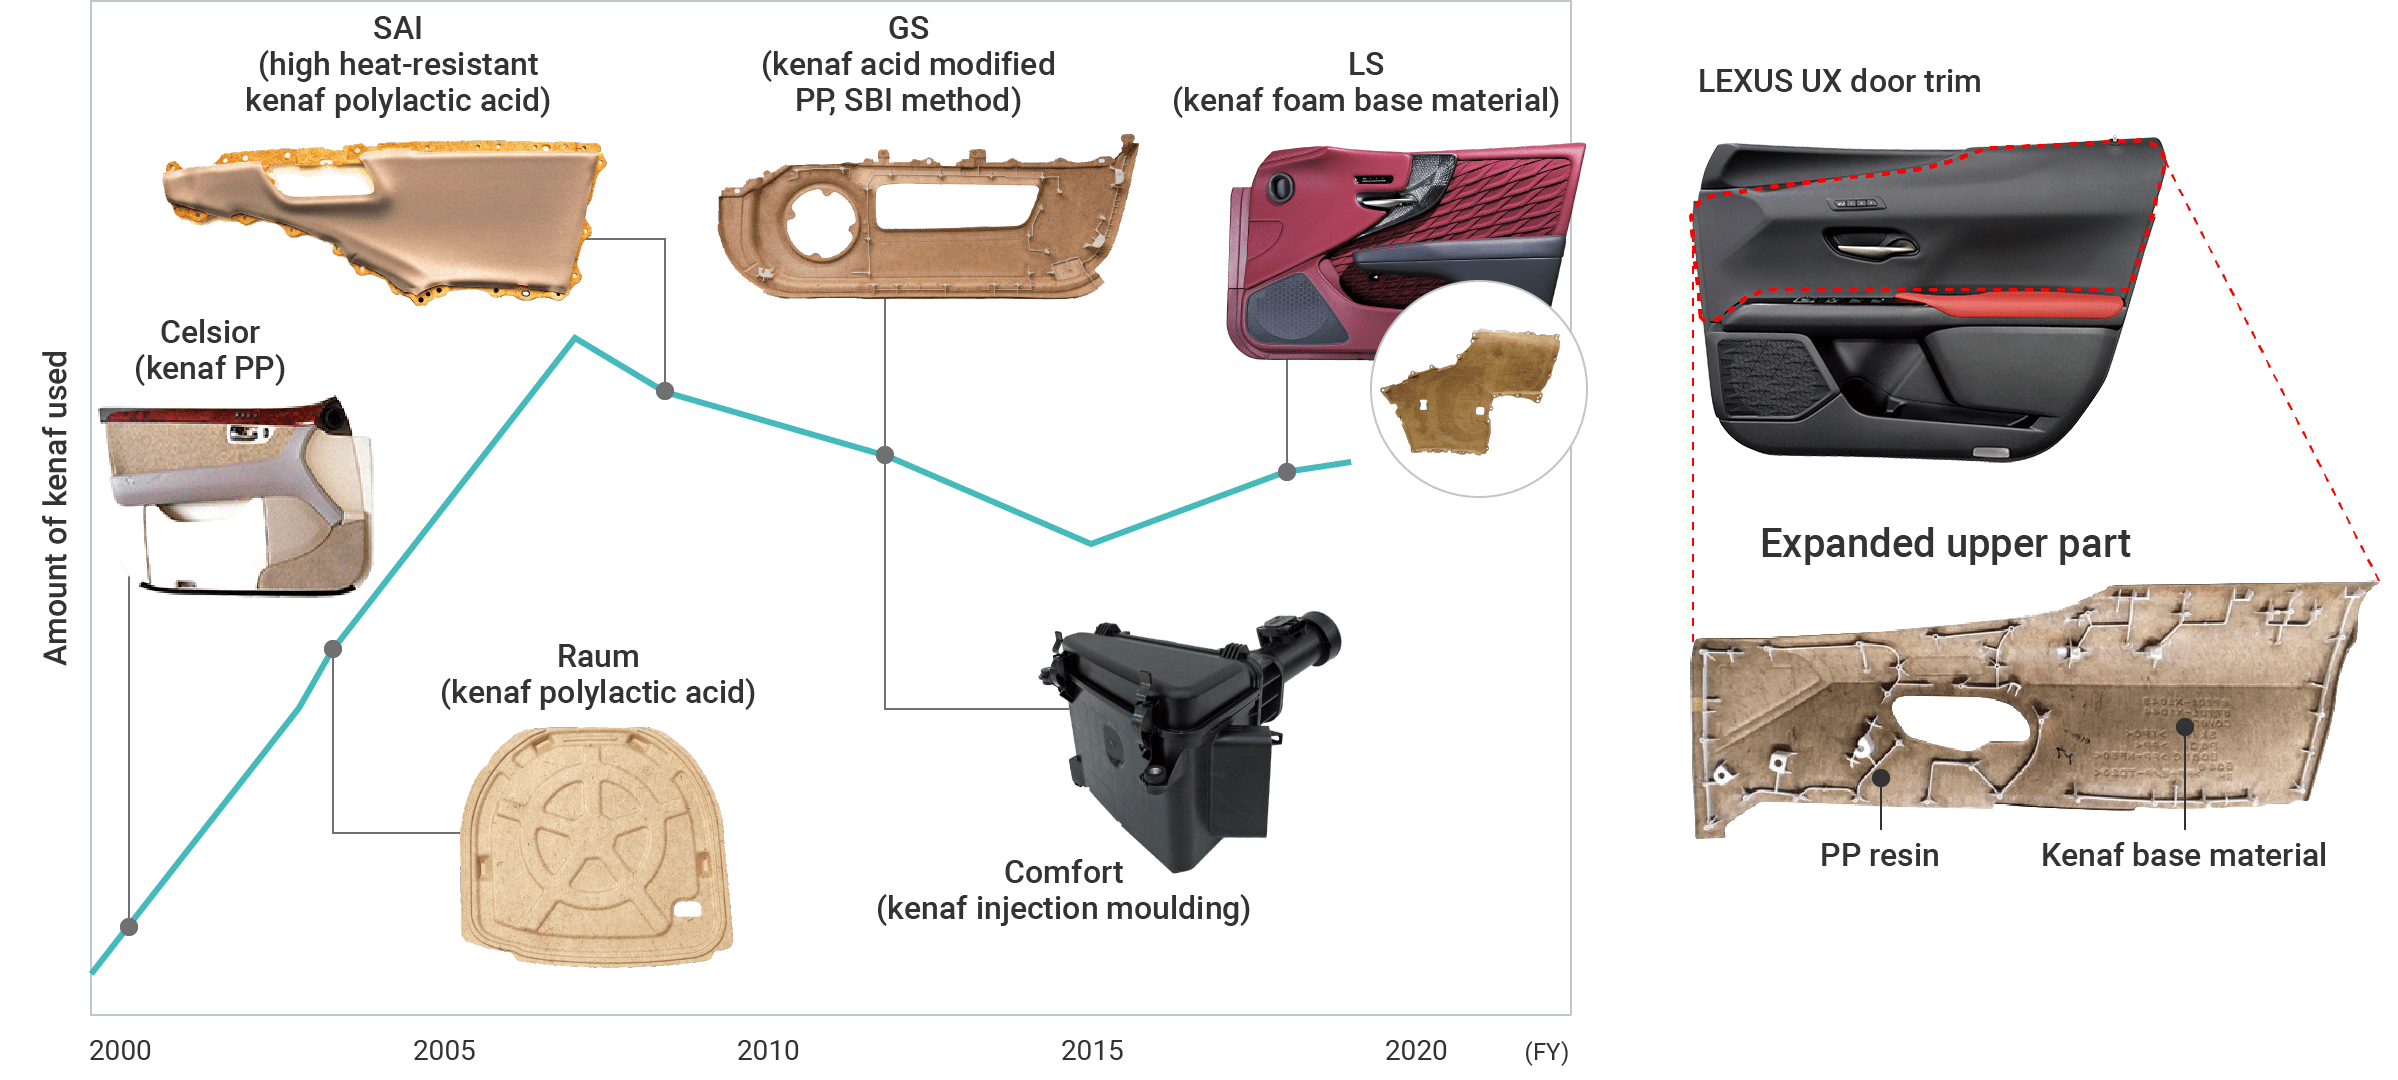 Figure:Sequential commercialization of kenaf base materials